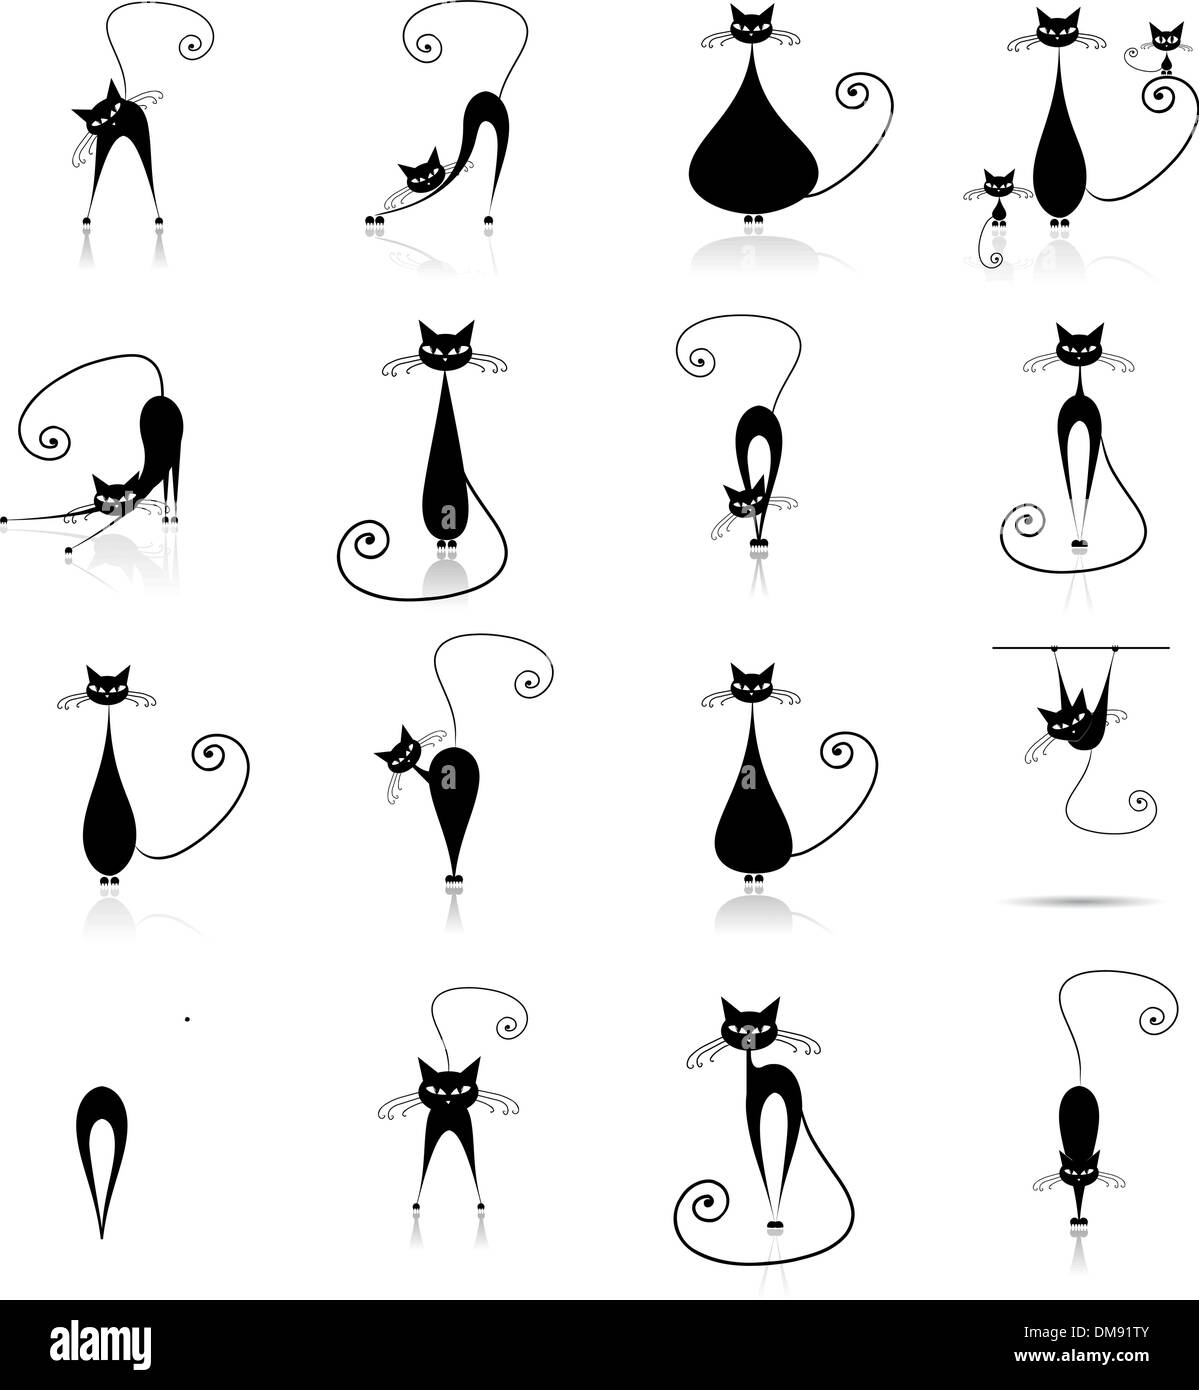 Collections Silhouette Chat Noir Image Vectorielle Stock Alamy